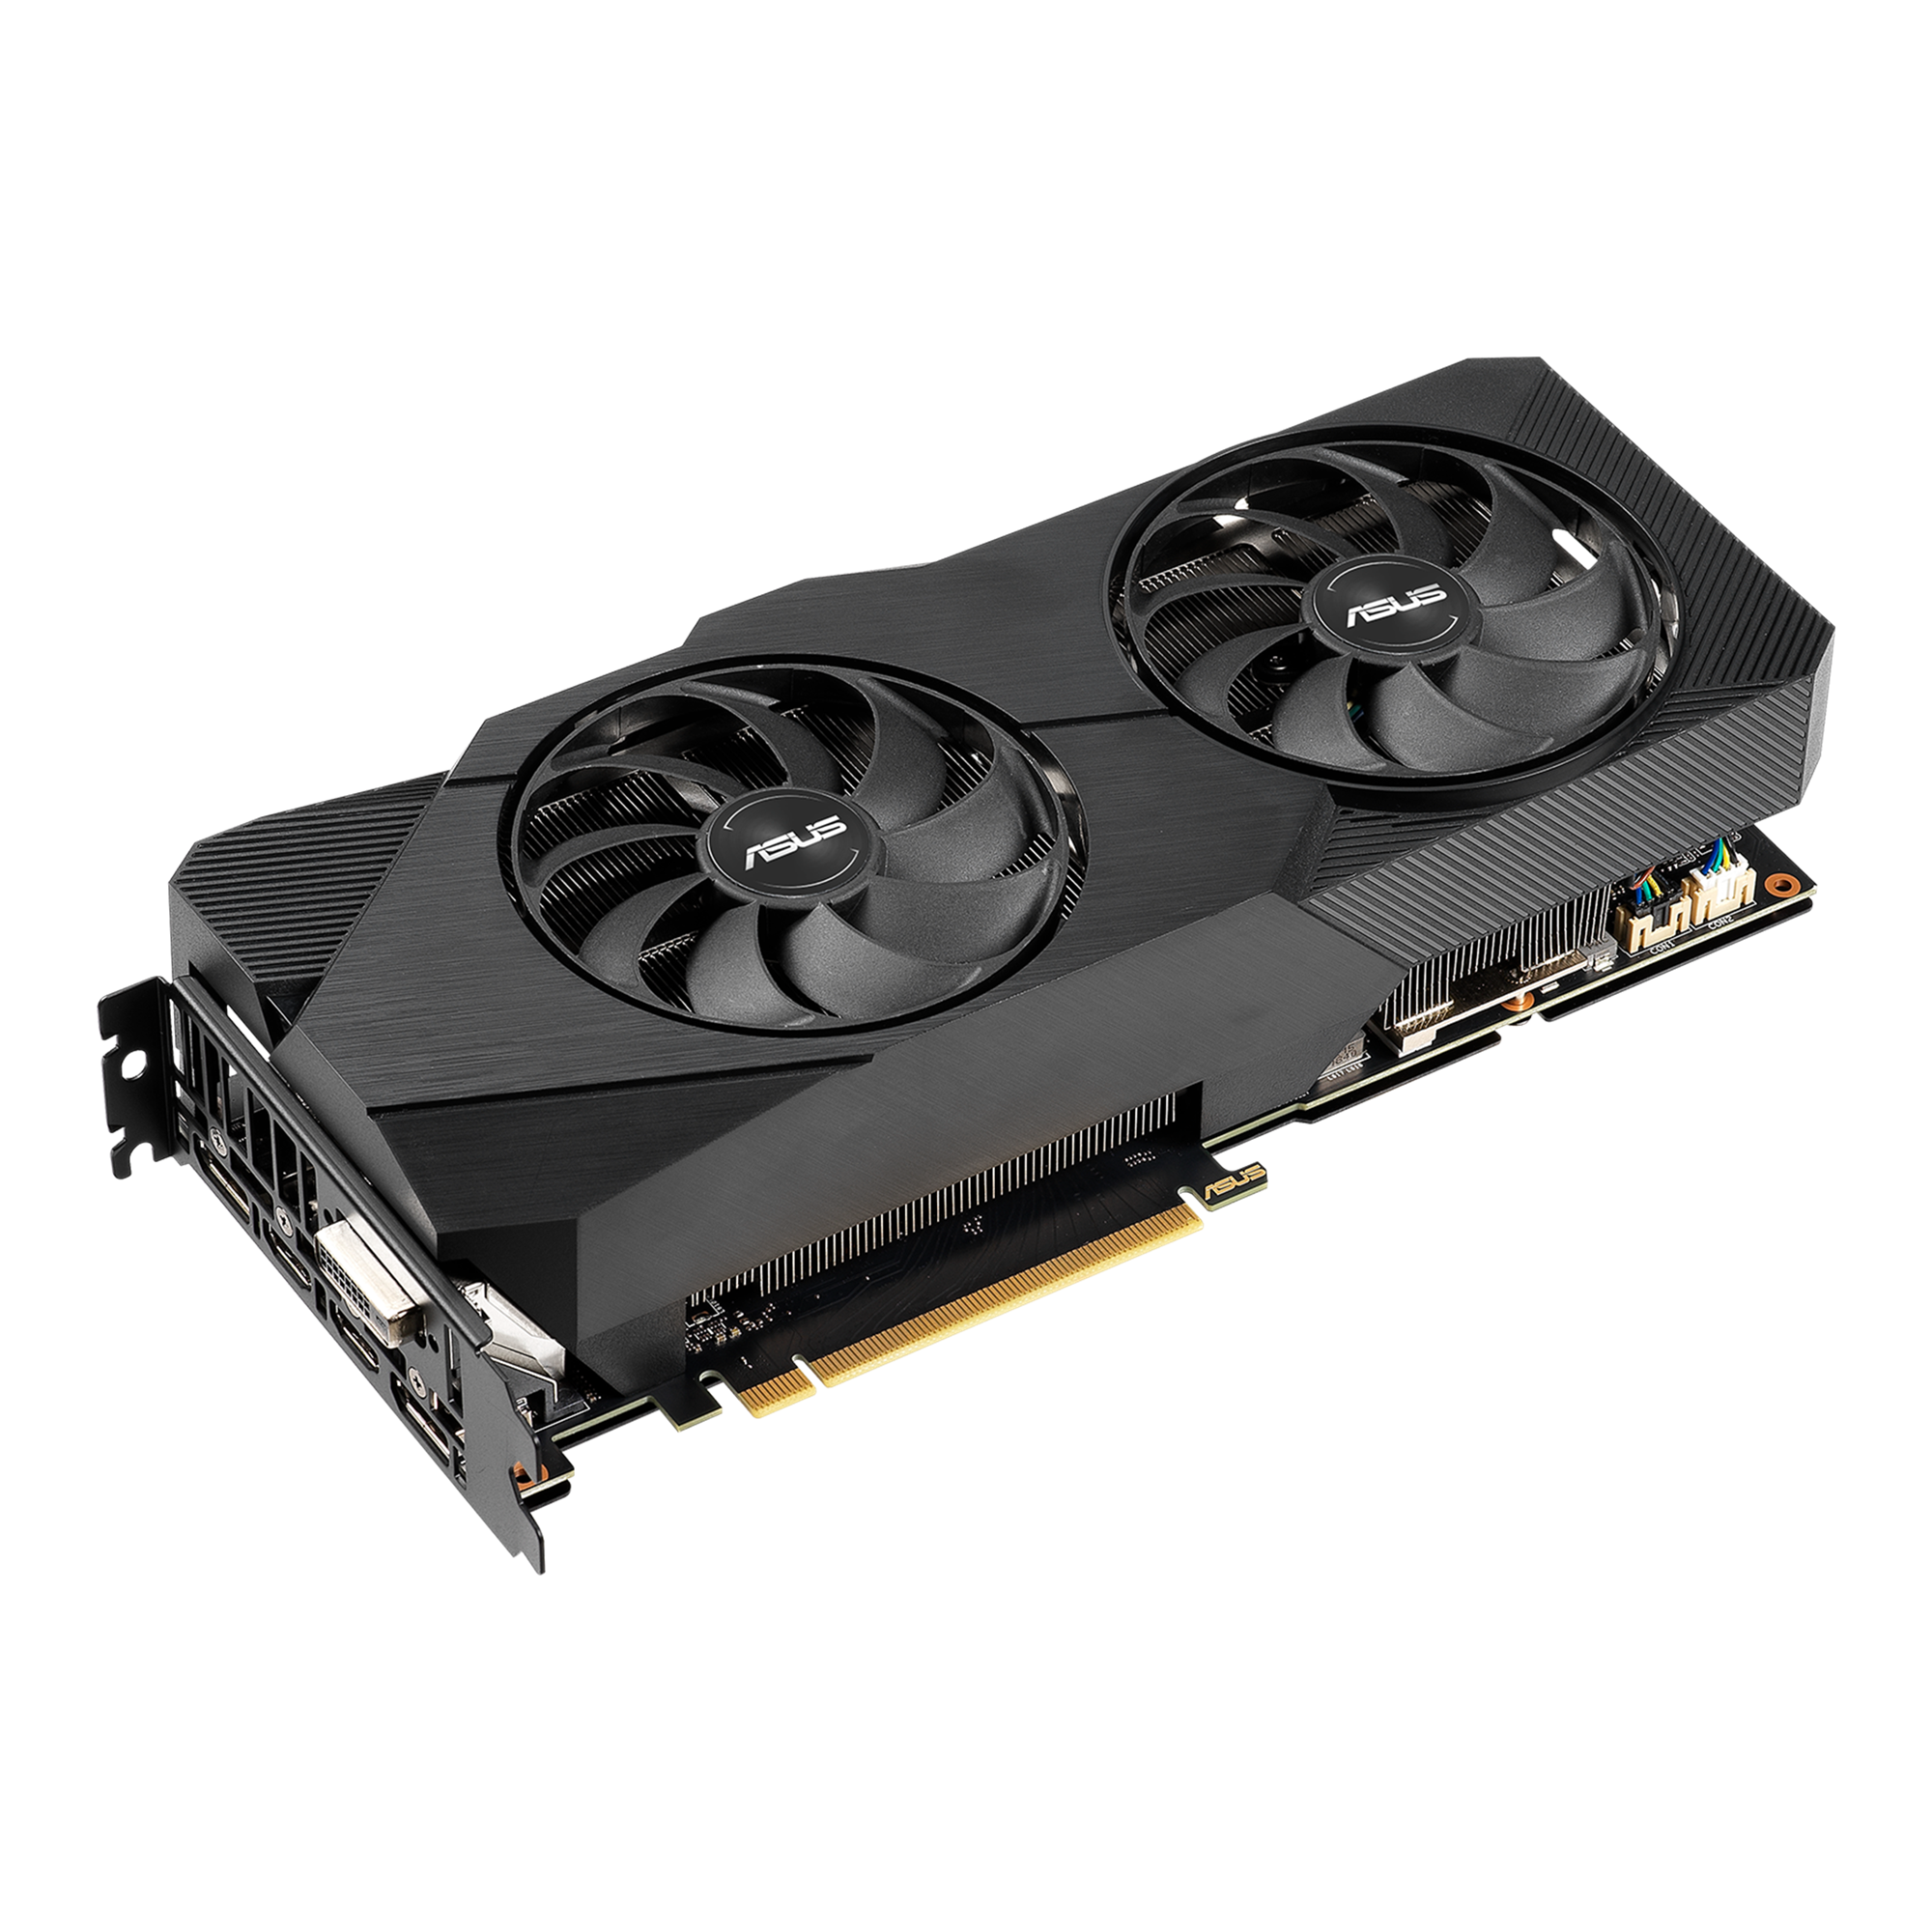 ASUS RTX-2070 DUAL 8G